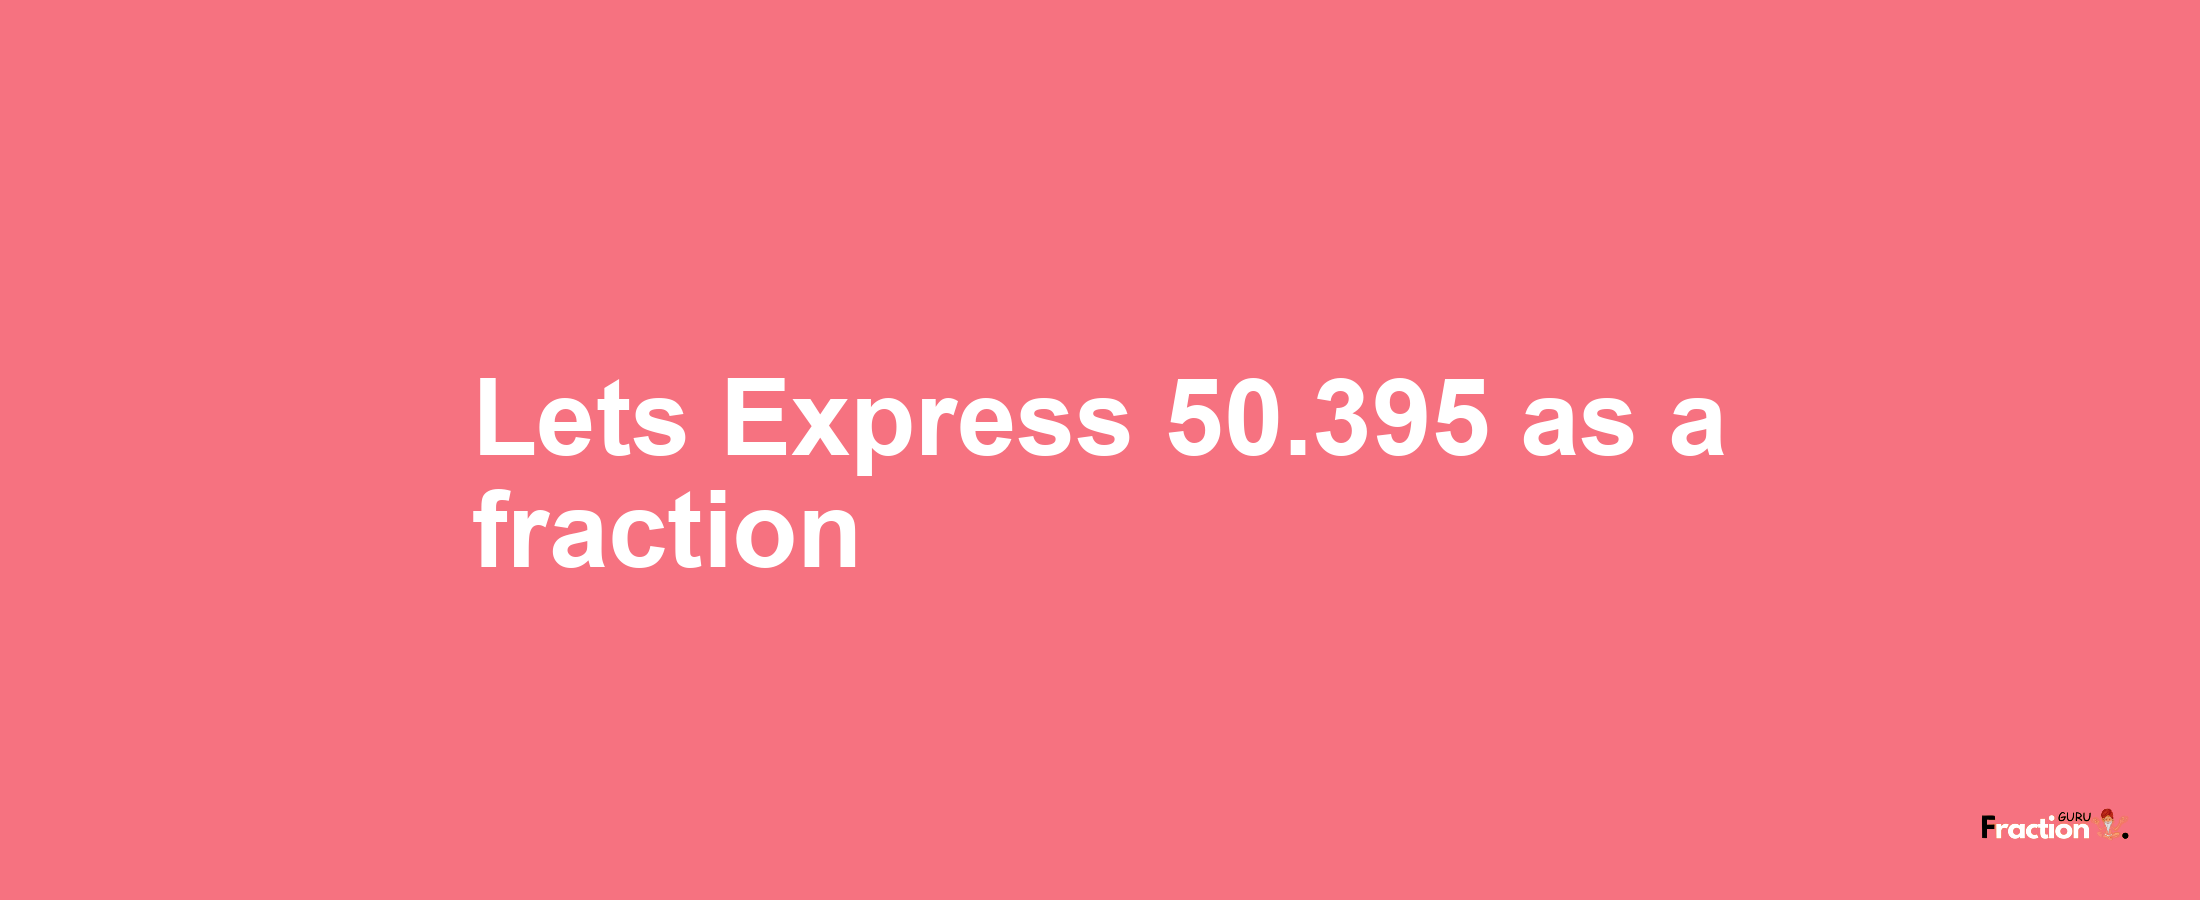 Lets Express 50.395 as afraction